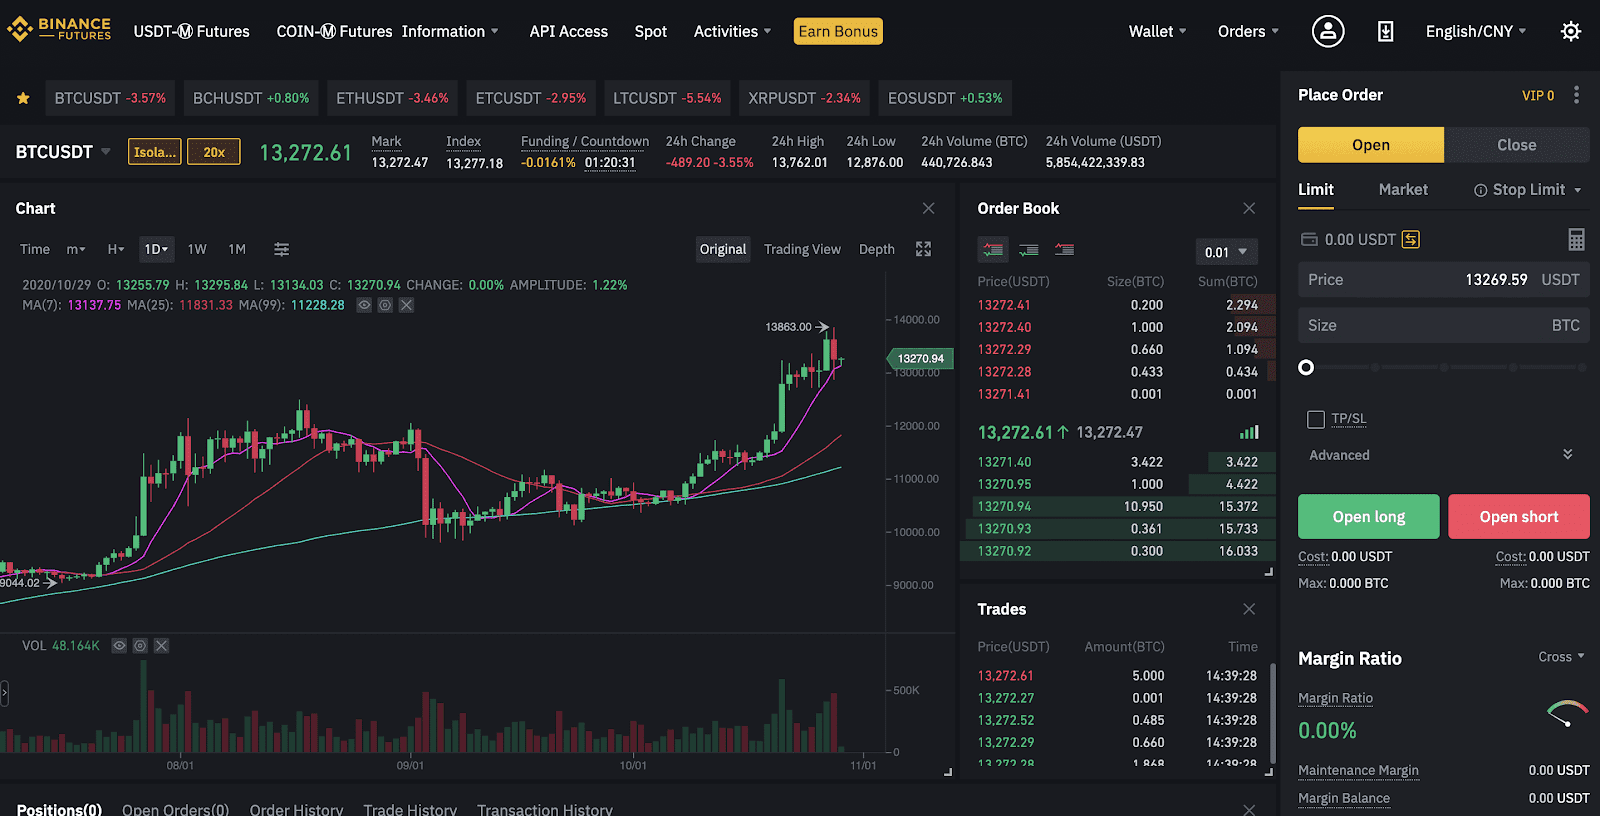 binance futures adjusted leverage on open position